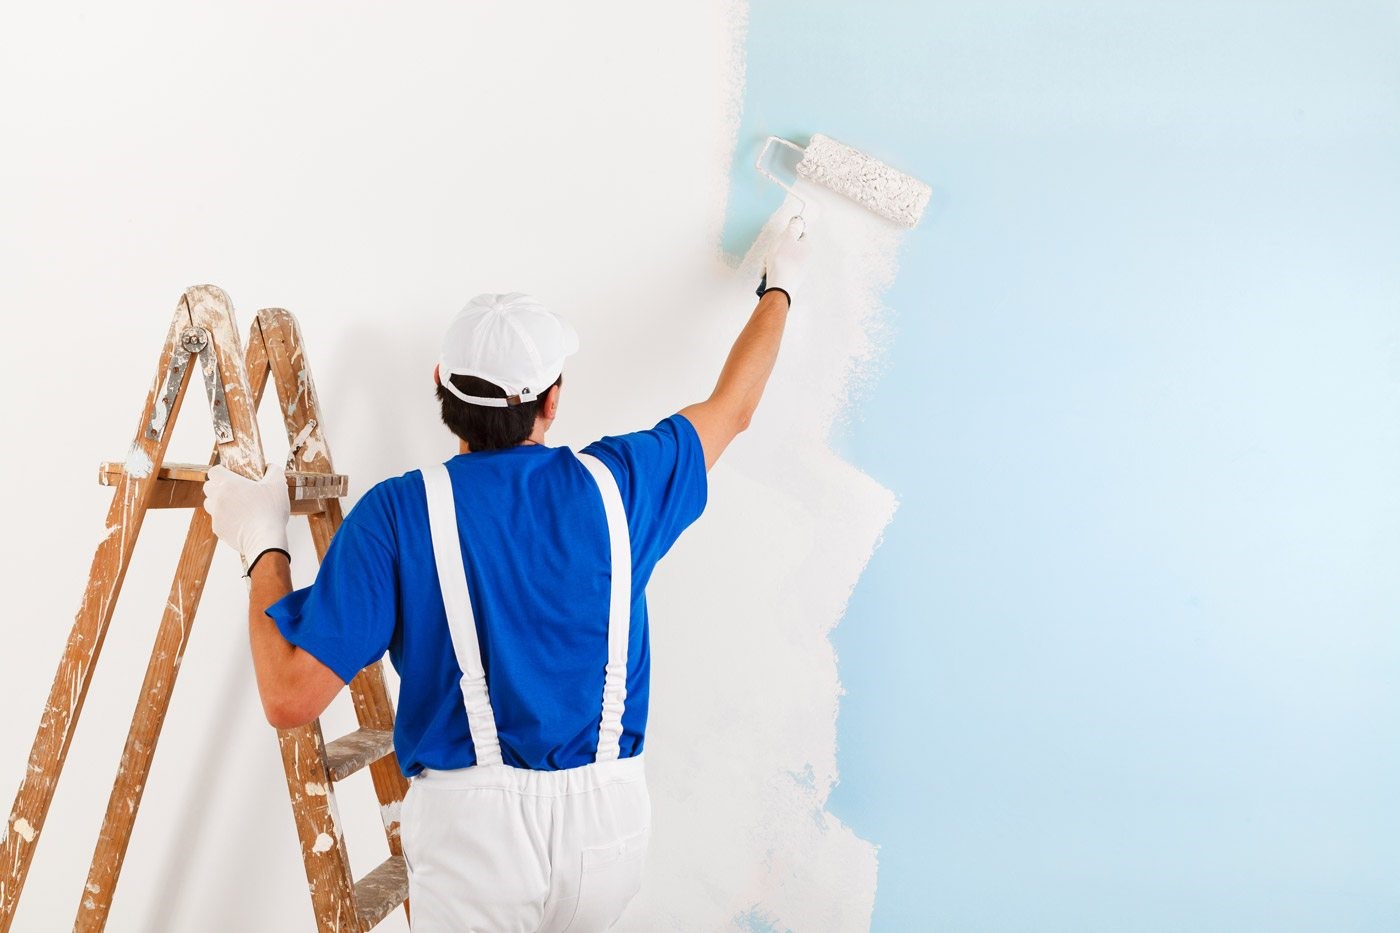 House Painting Contractor